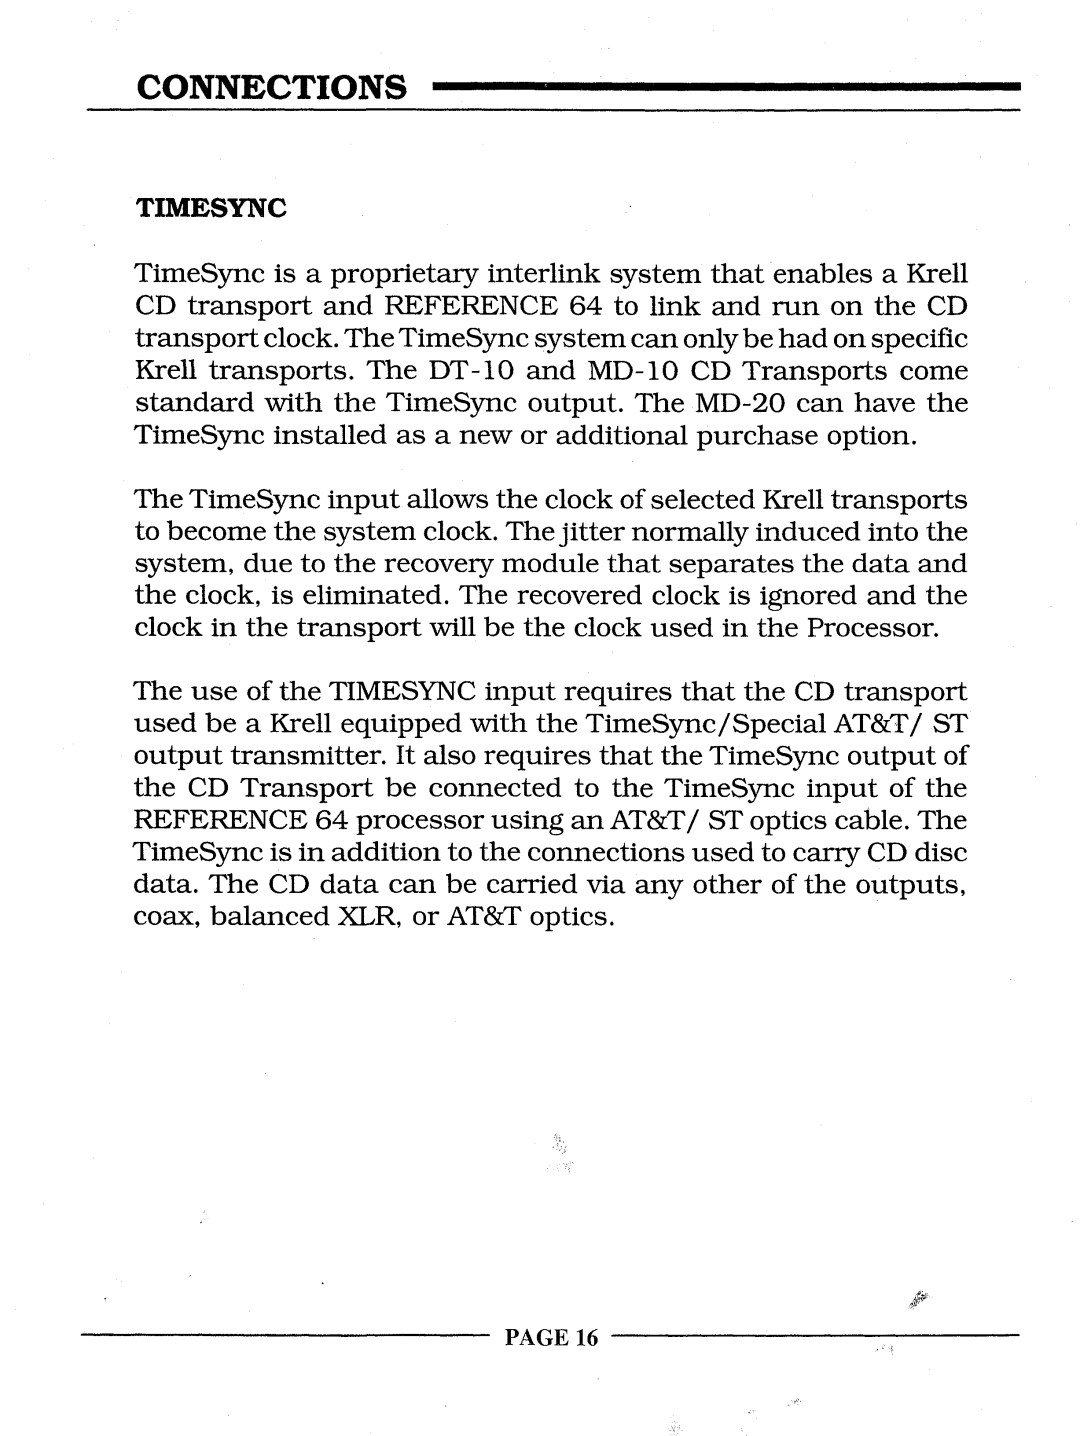 Krell Industries REFERENCE 64 manual Timesync, PAGE16, Connections 